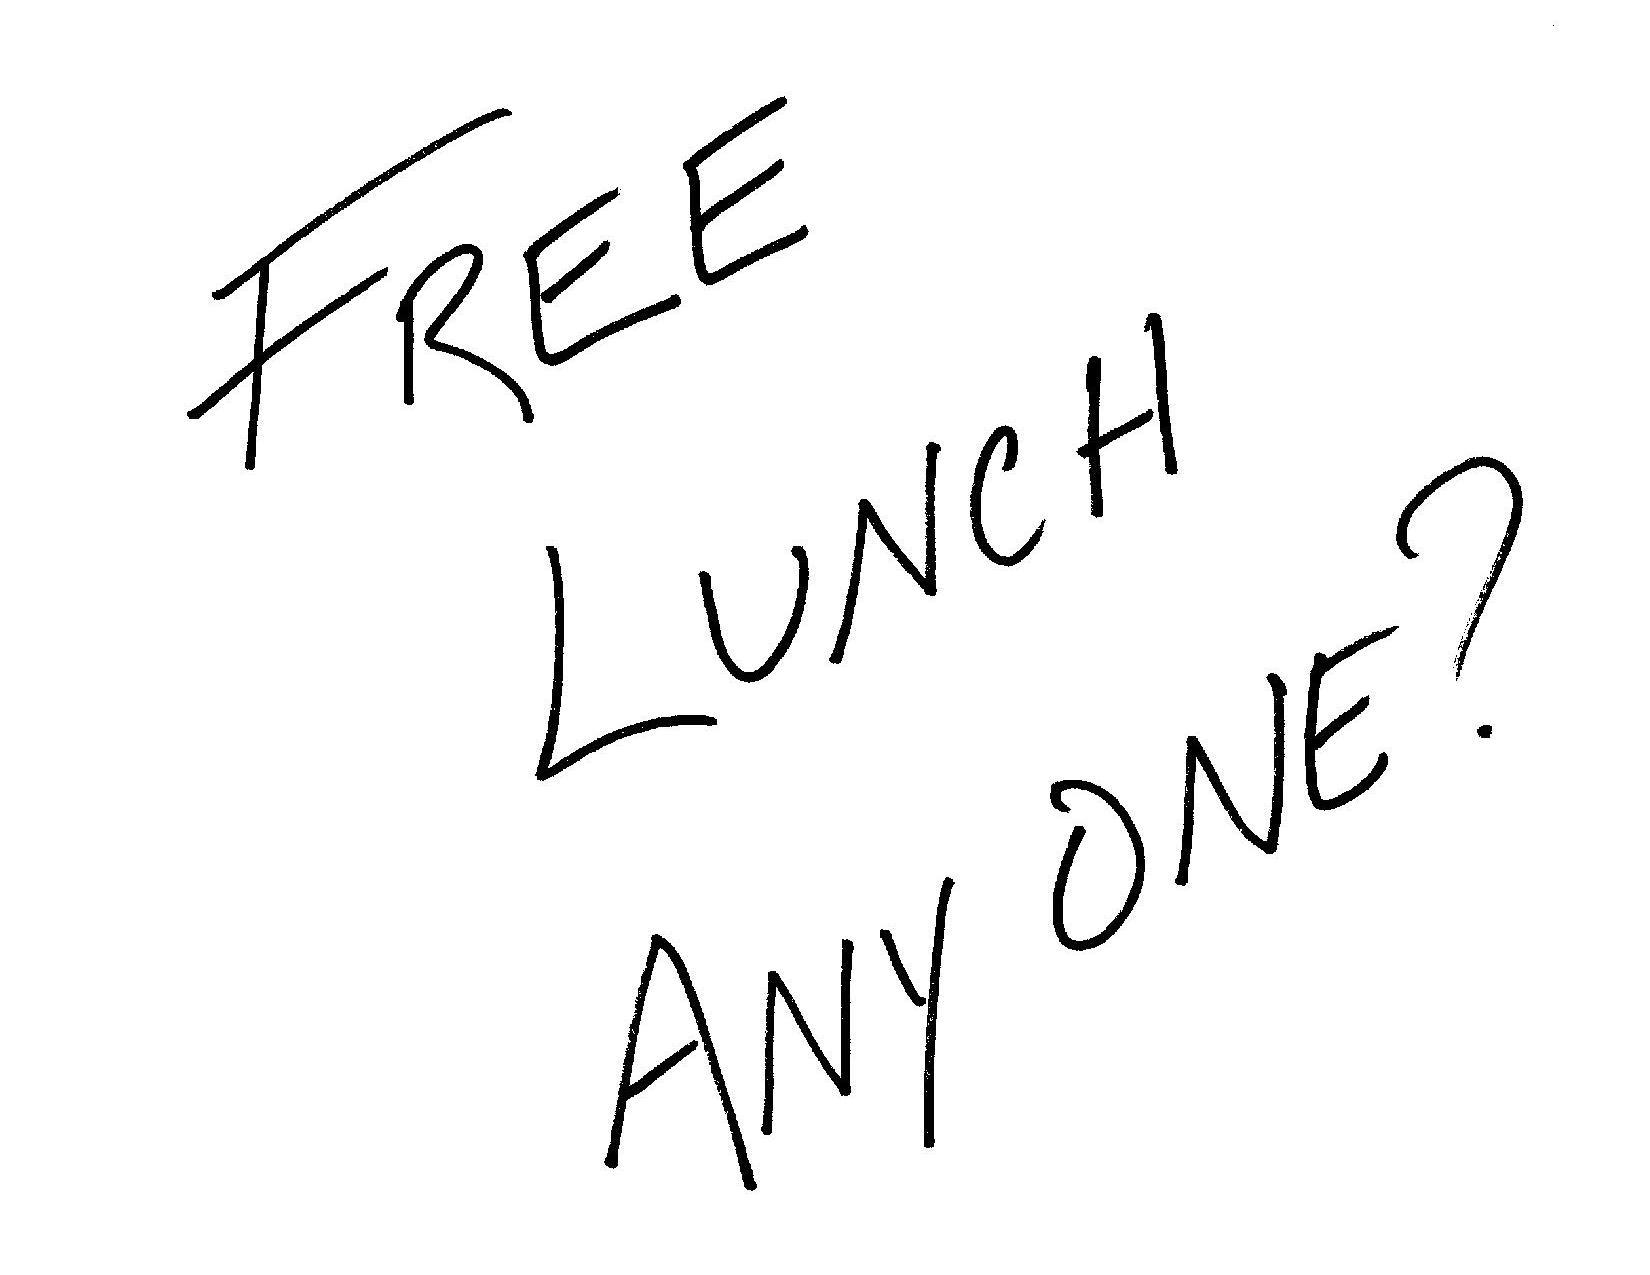 Free lunch anyone?